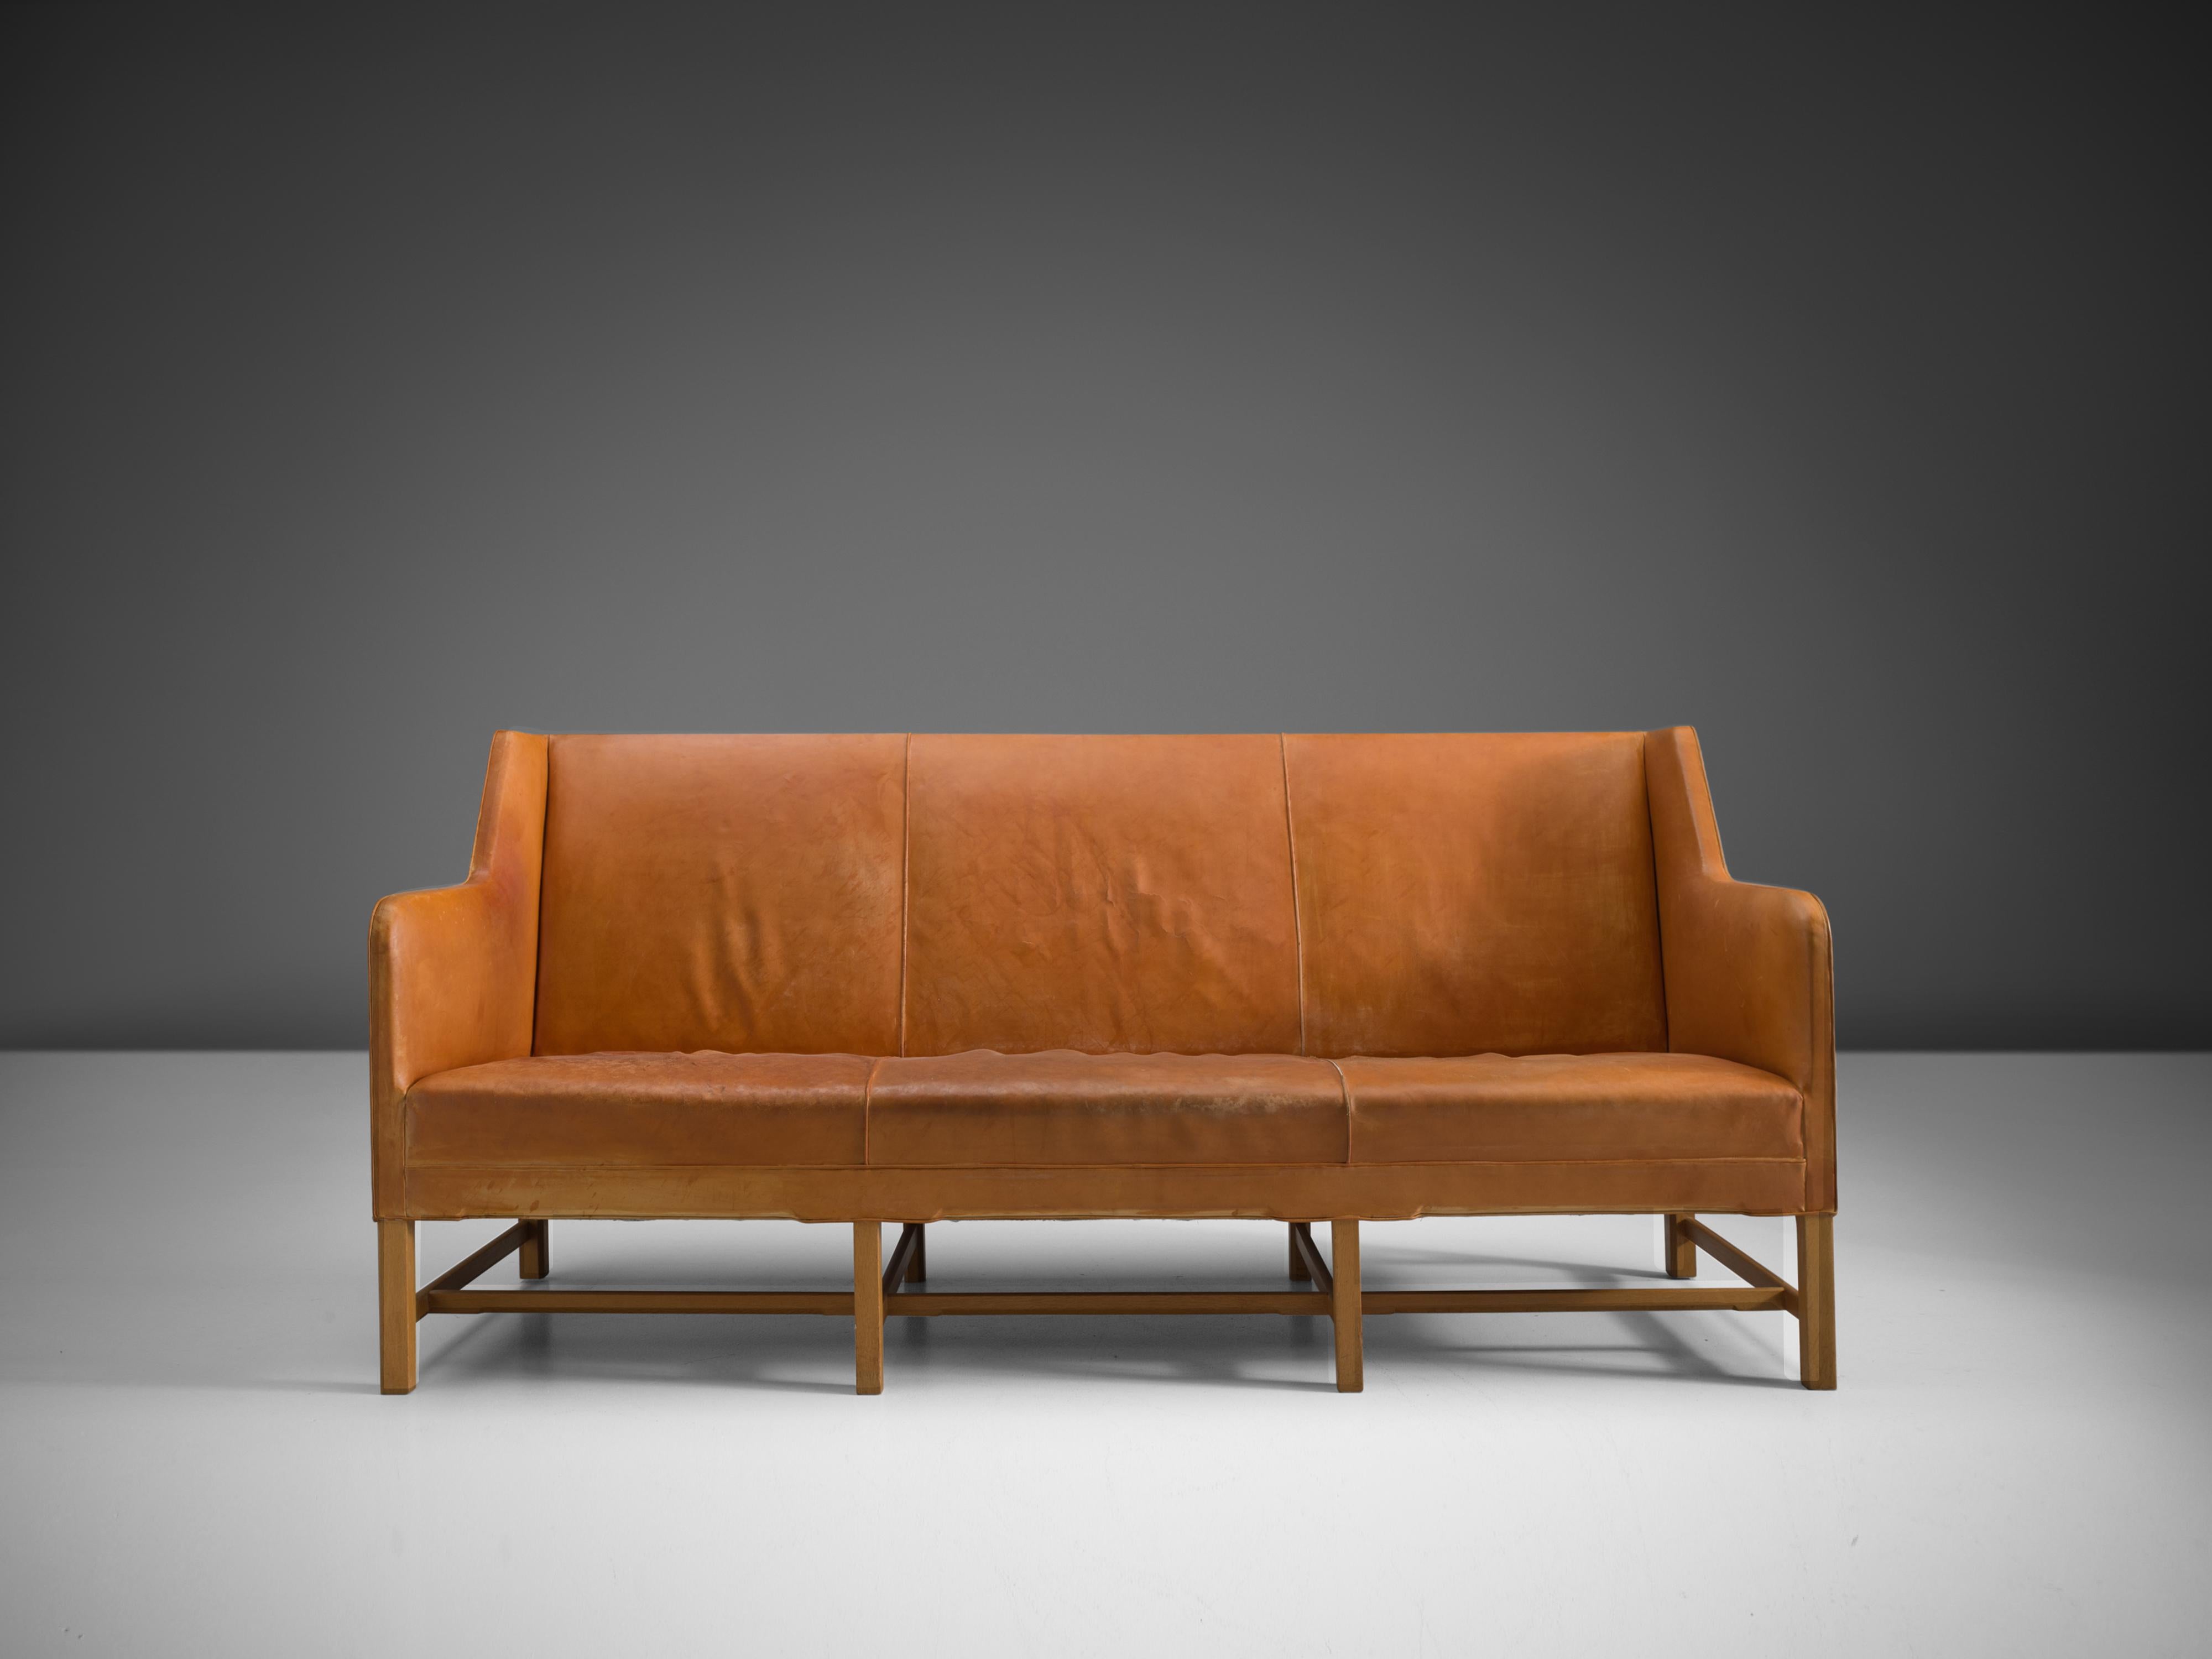 Kaare Klint for Rud Rasmussen, sofa model 4118, leather, wood, Denmark, design 1929

Classic and elegant Scandinavian three-seat sofa by Kaare Klint designed in 1935. The high back is structured by vertical lines into three parts that flow over into